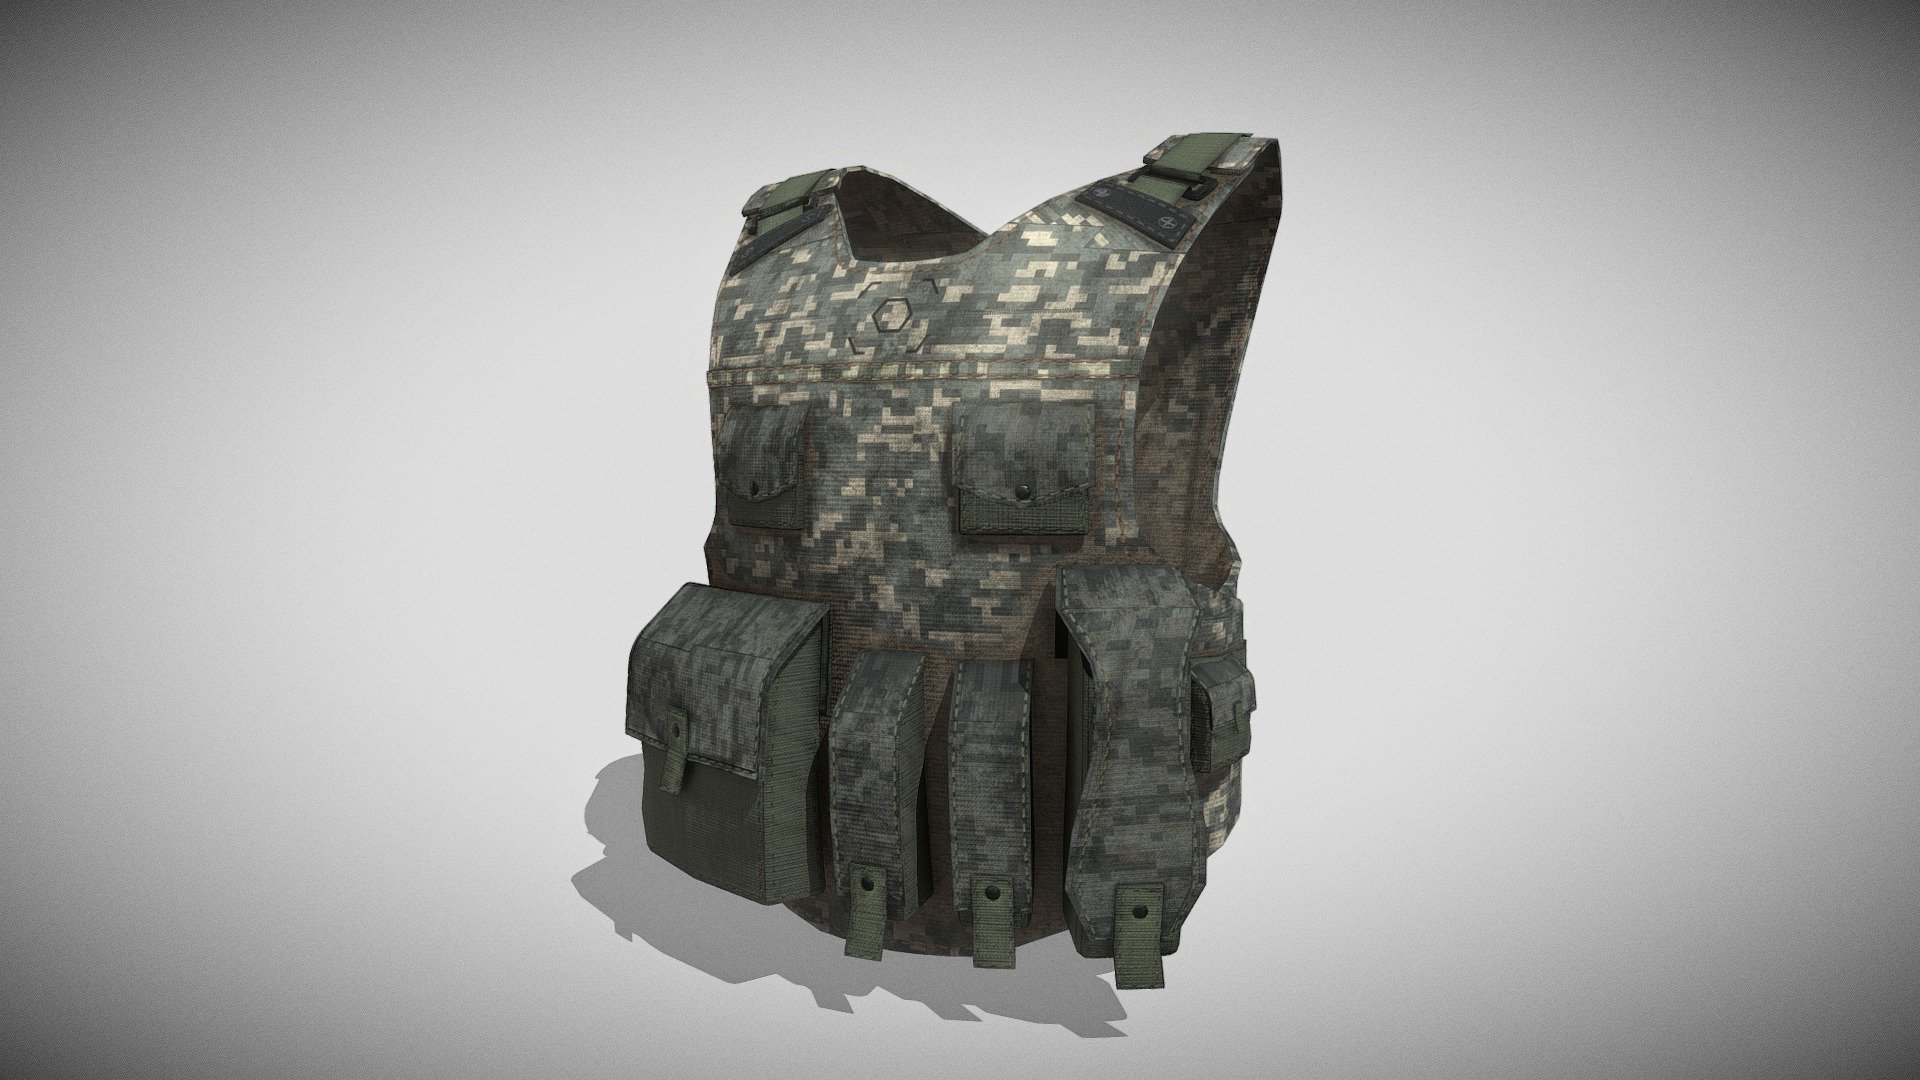 Military Vest
Modeled in Blender, Texture in Substance Painter . 4K PBR Texture.
Game-ready

Others:

You can also check out these newly released models:




Professional Tripod

Video Camera Canon LEGRIA HF R806

Survival Horror Pack

I work as a freelancer on the Fiverr platform:
https://www.fiverr.com/jakubivanco/create-3d-game-art-models-for-your-game

I will be happy for any feedback 3d model